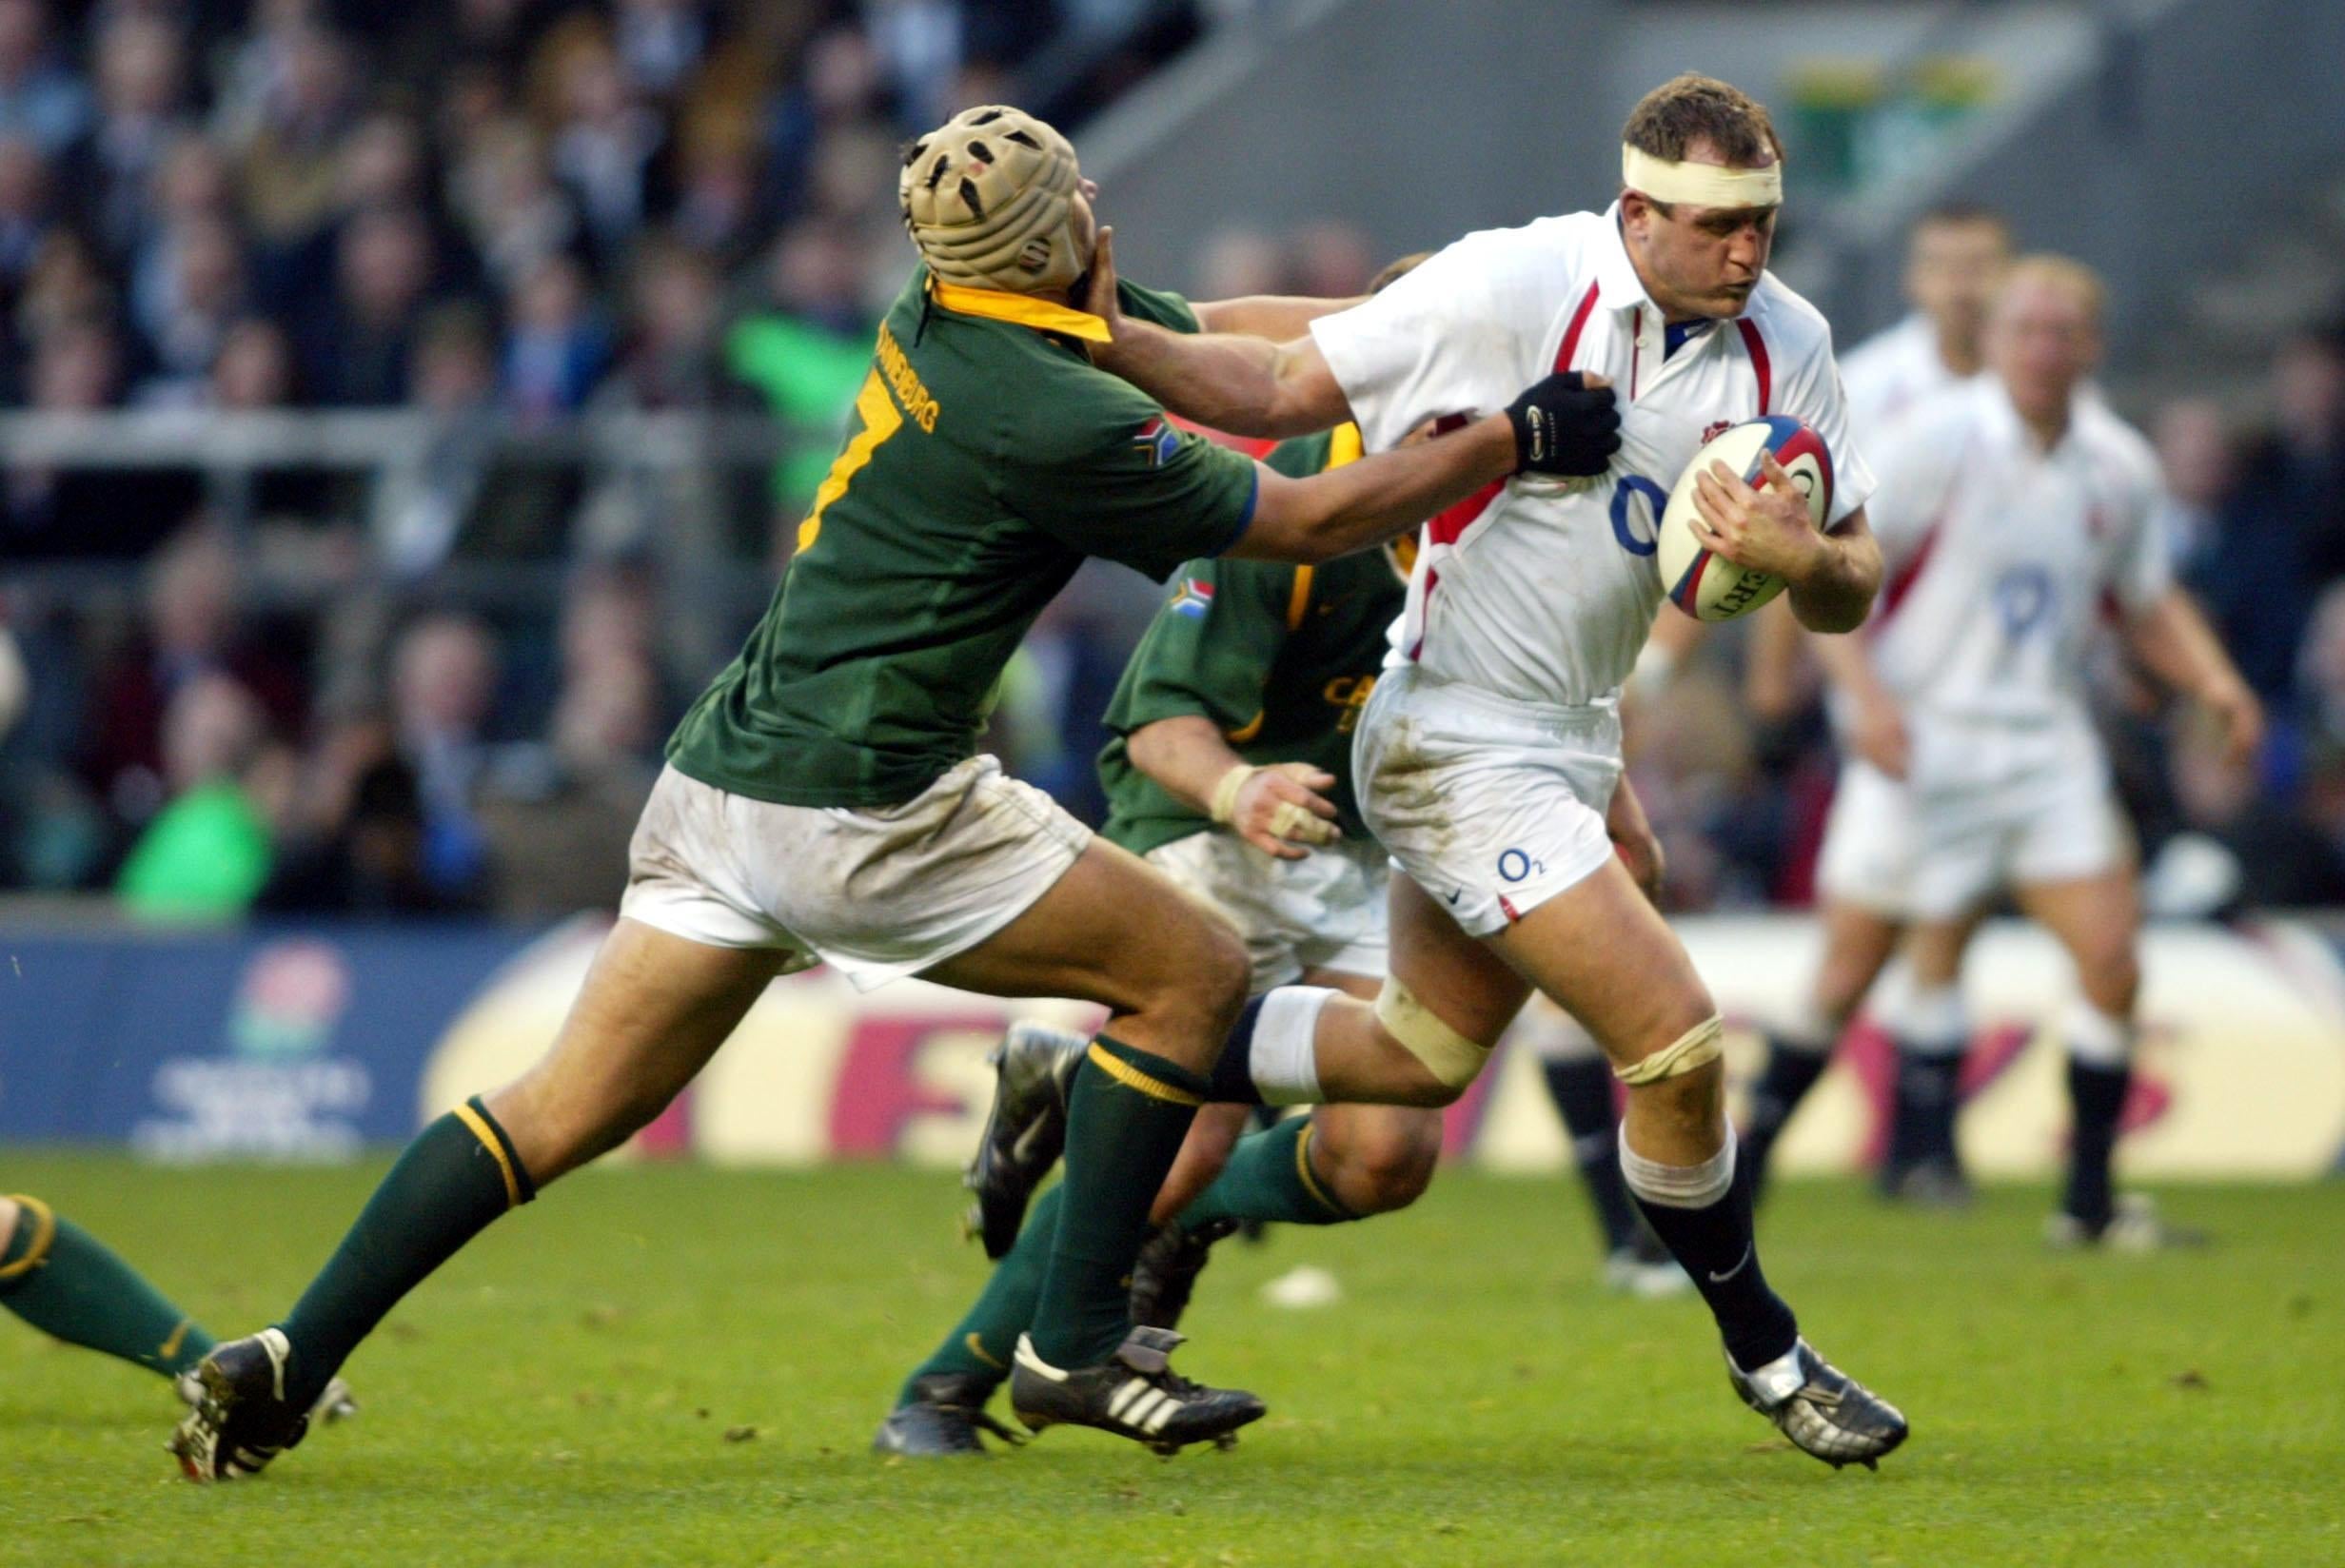 South Africa’s Pedrie Wannenburg (left) tackles England’s Richard Hill (Tom Hevezi/PA)